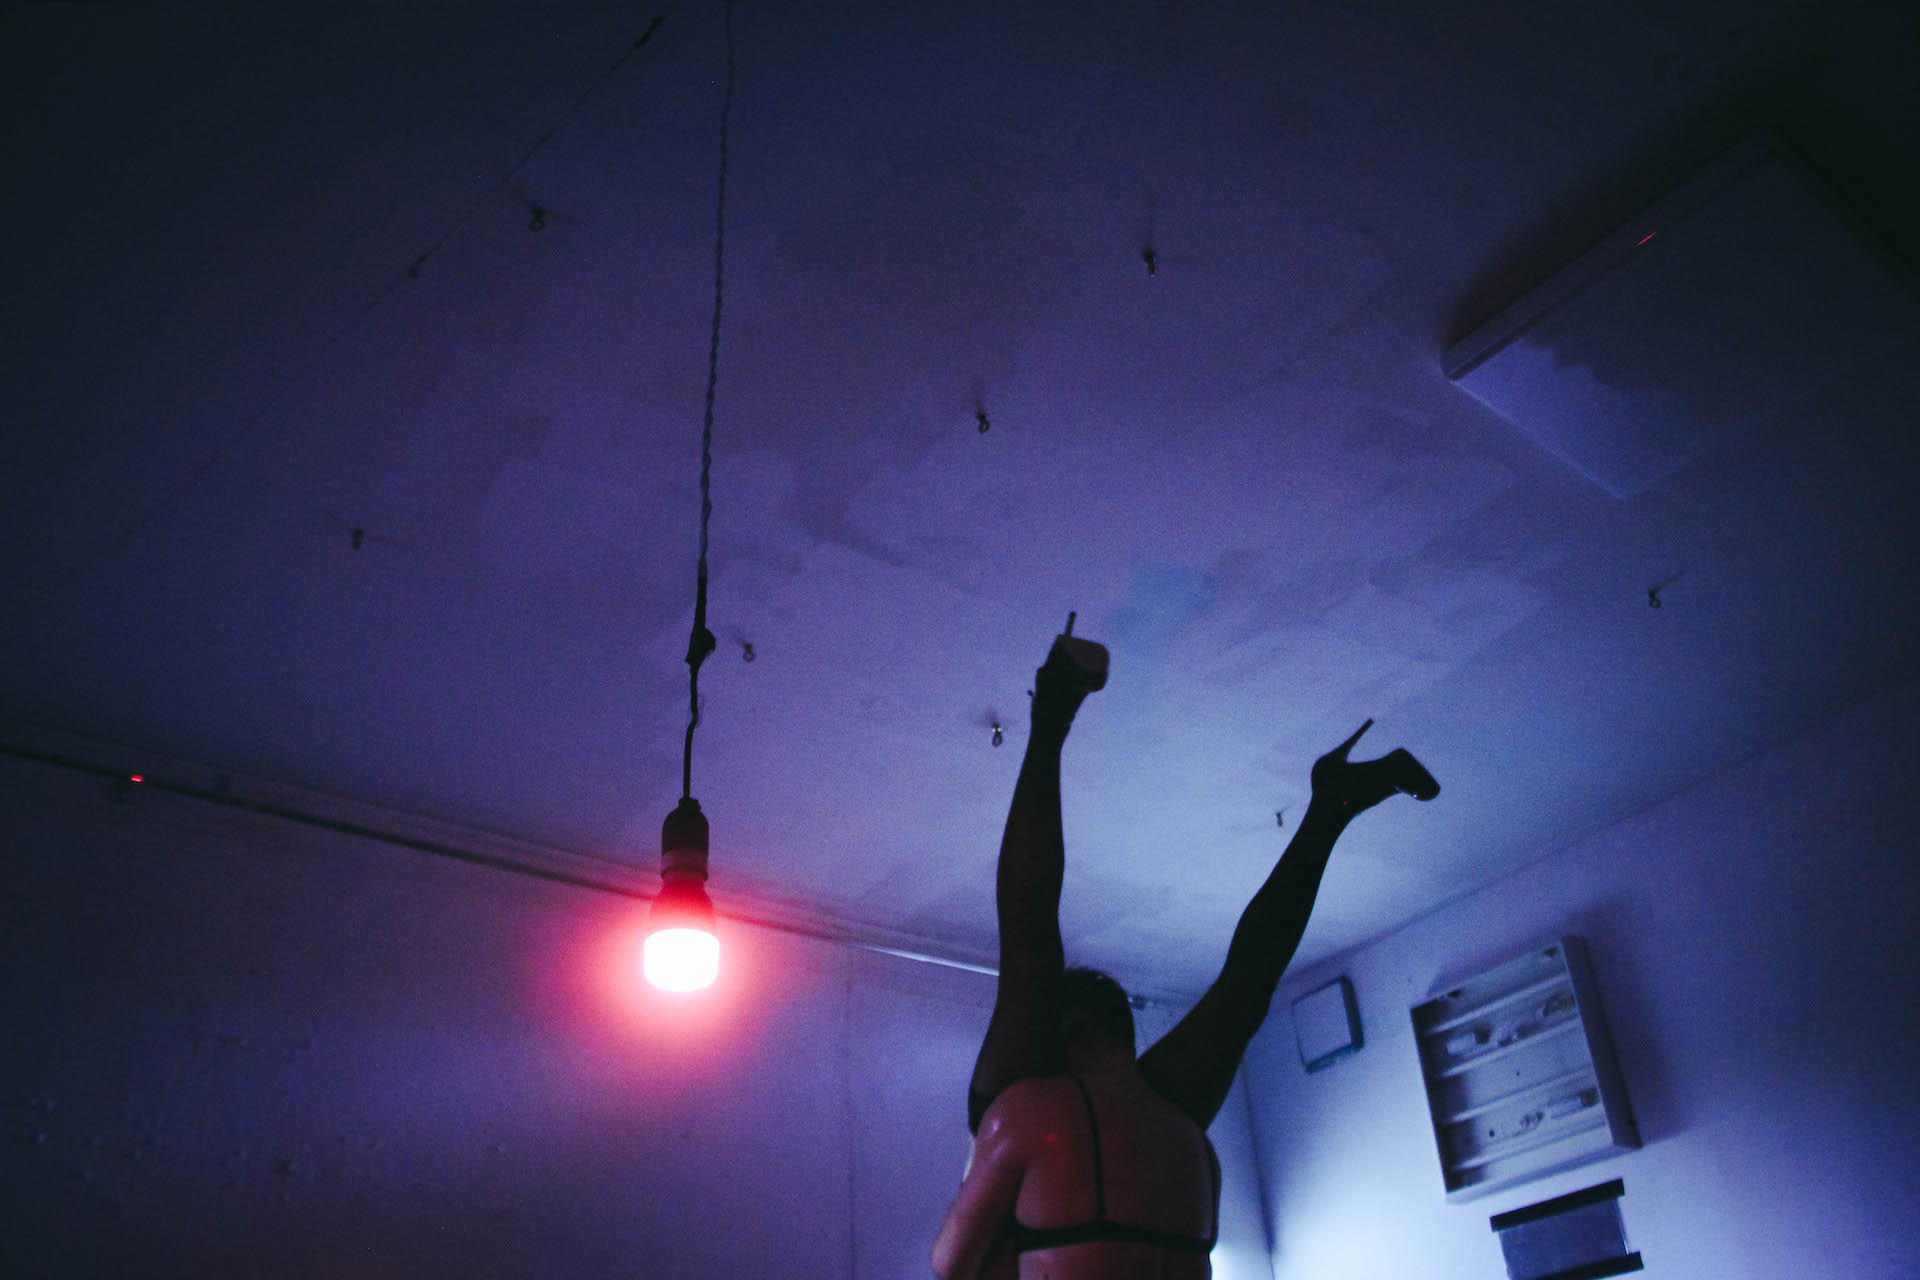 In a dark blue lighted room, a red light bulb is hanging by the ceiling. One performer wearing a bra is holding another performer wearing pantyhose and high heels up-side-down by the waist.